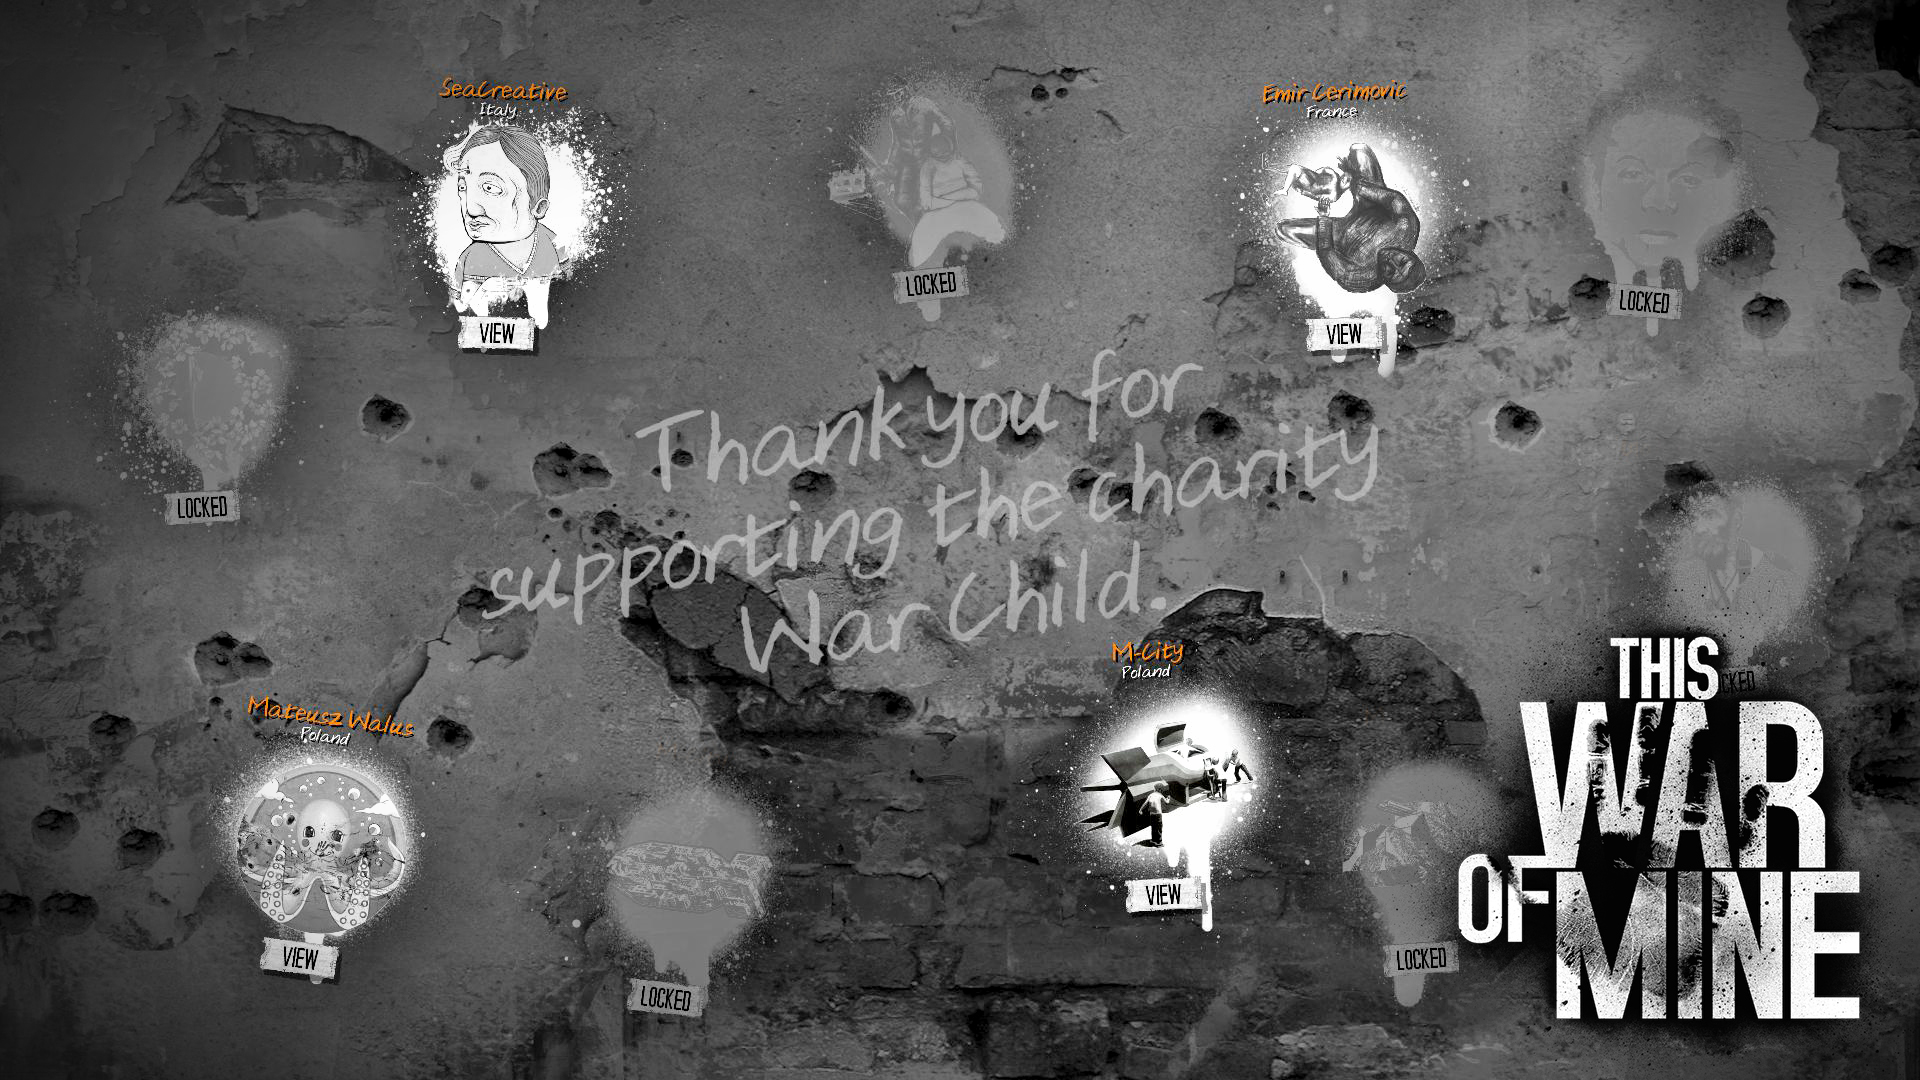 This war of mine: war child charity download free. full